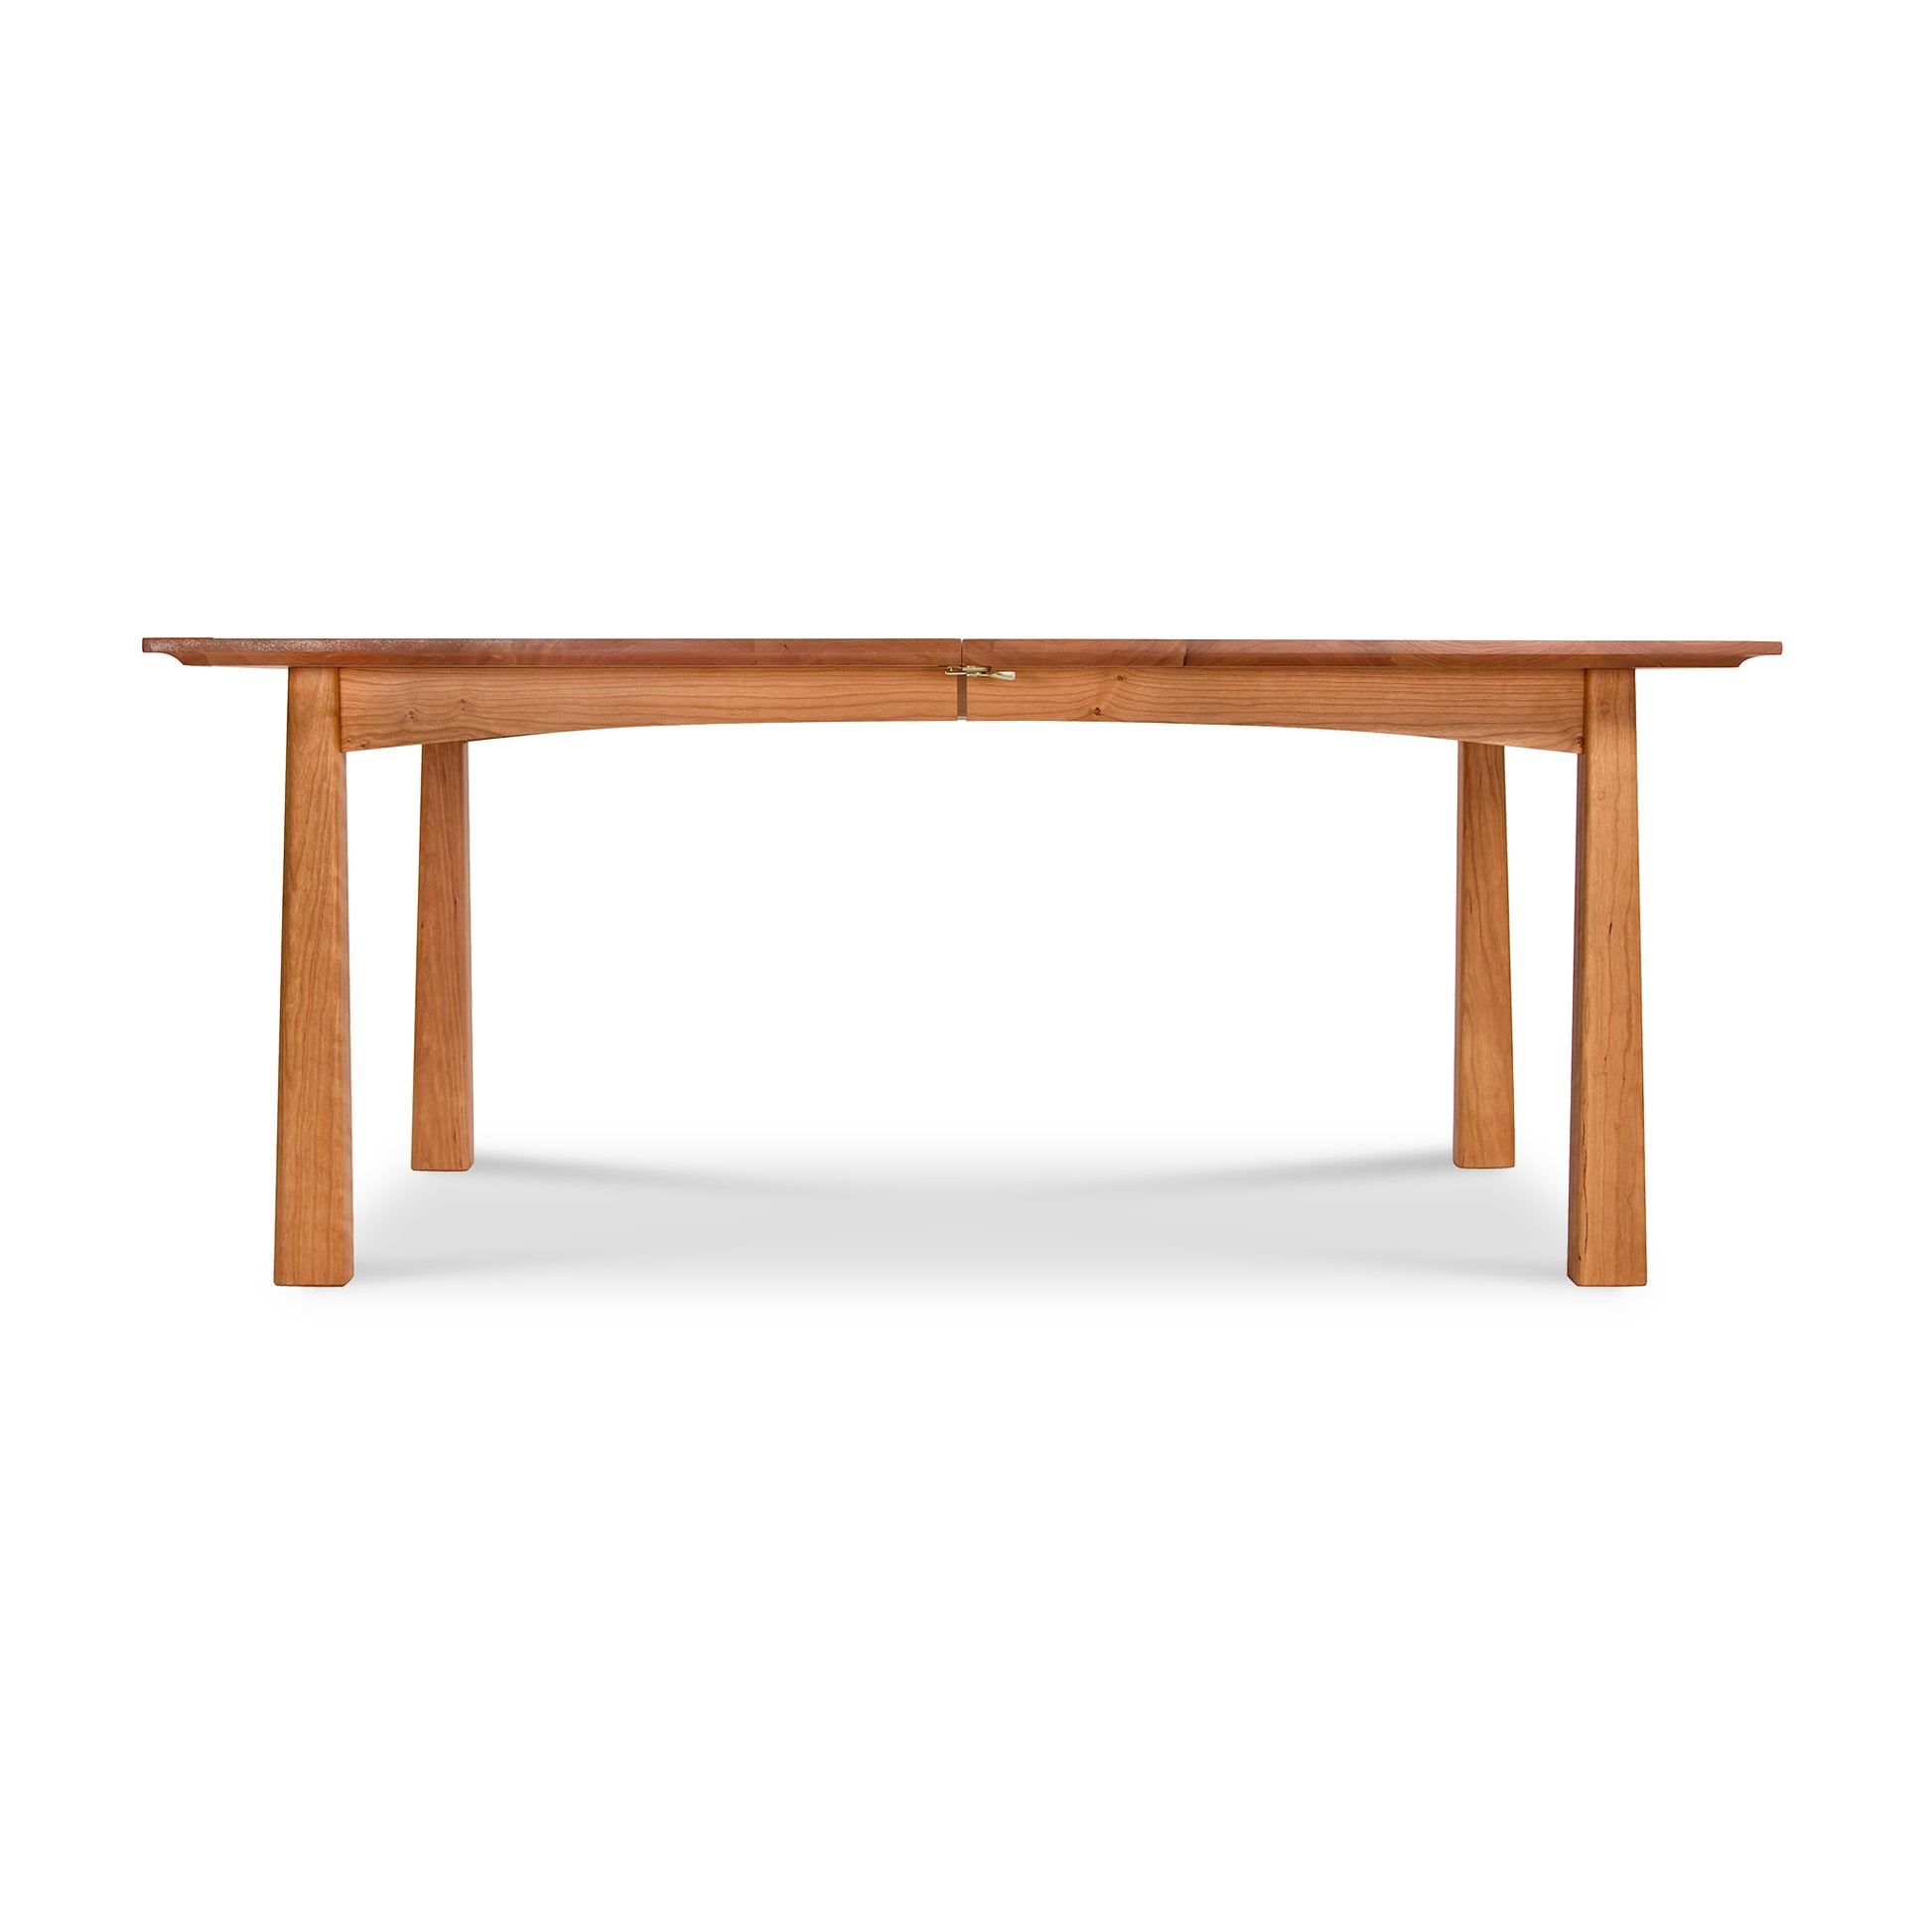 A simple natural Cherry Moon Extension Dining Table with a straight top and four sturdy legs, photographed against a white background by Maple Corner Woodworks.